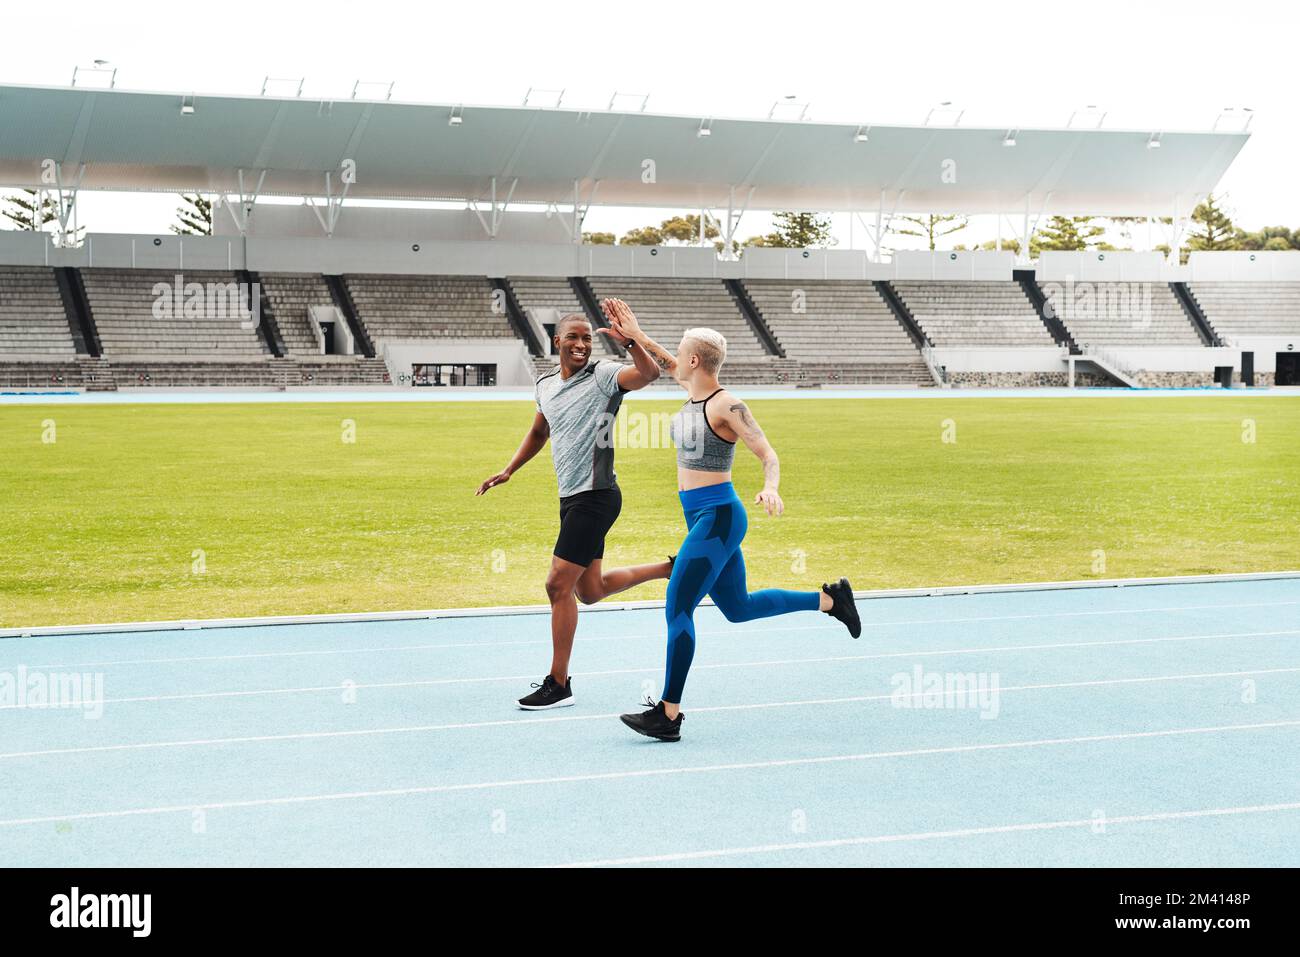 You did great. Full length shot of two young athletes giving each other a high five during a run on a track field. Stock Photo